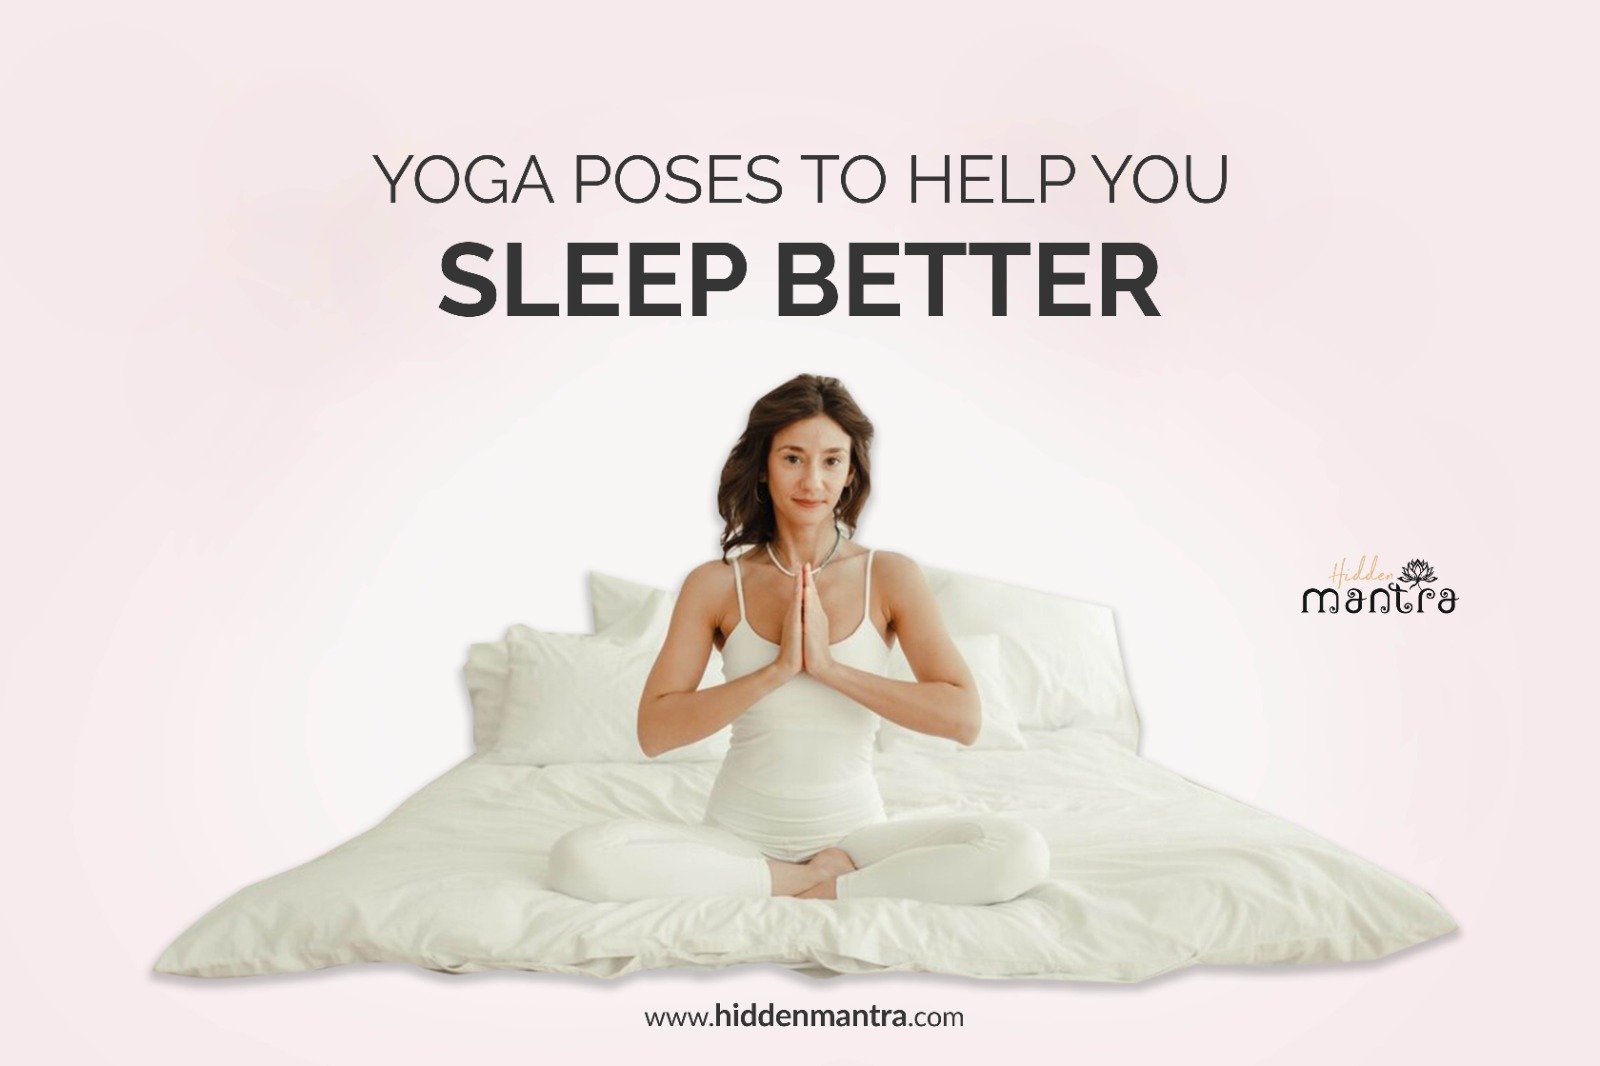 10 Stretches to Do Before Bed to Improve Your Sleep | HSS